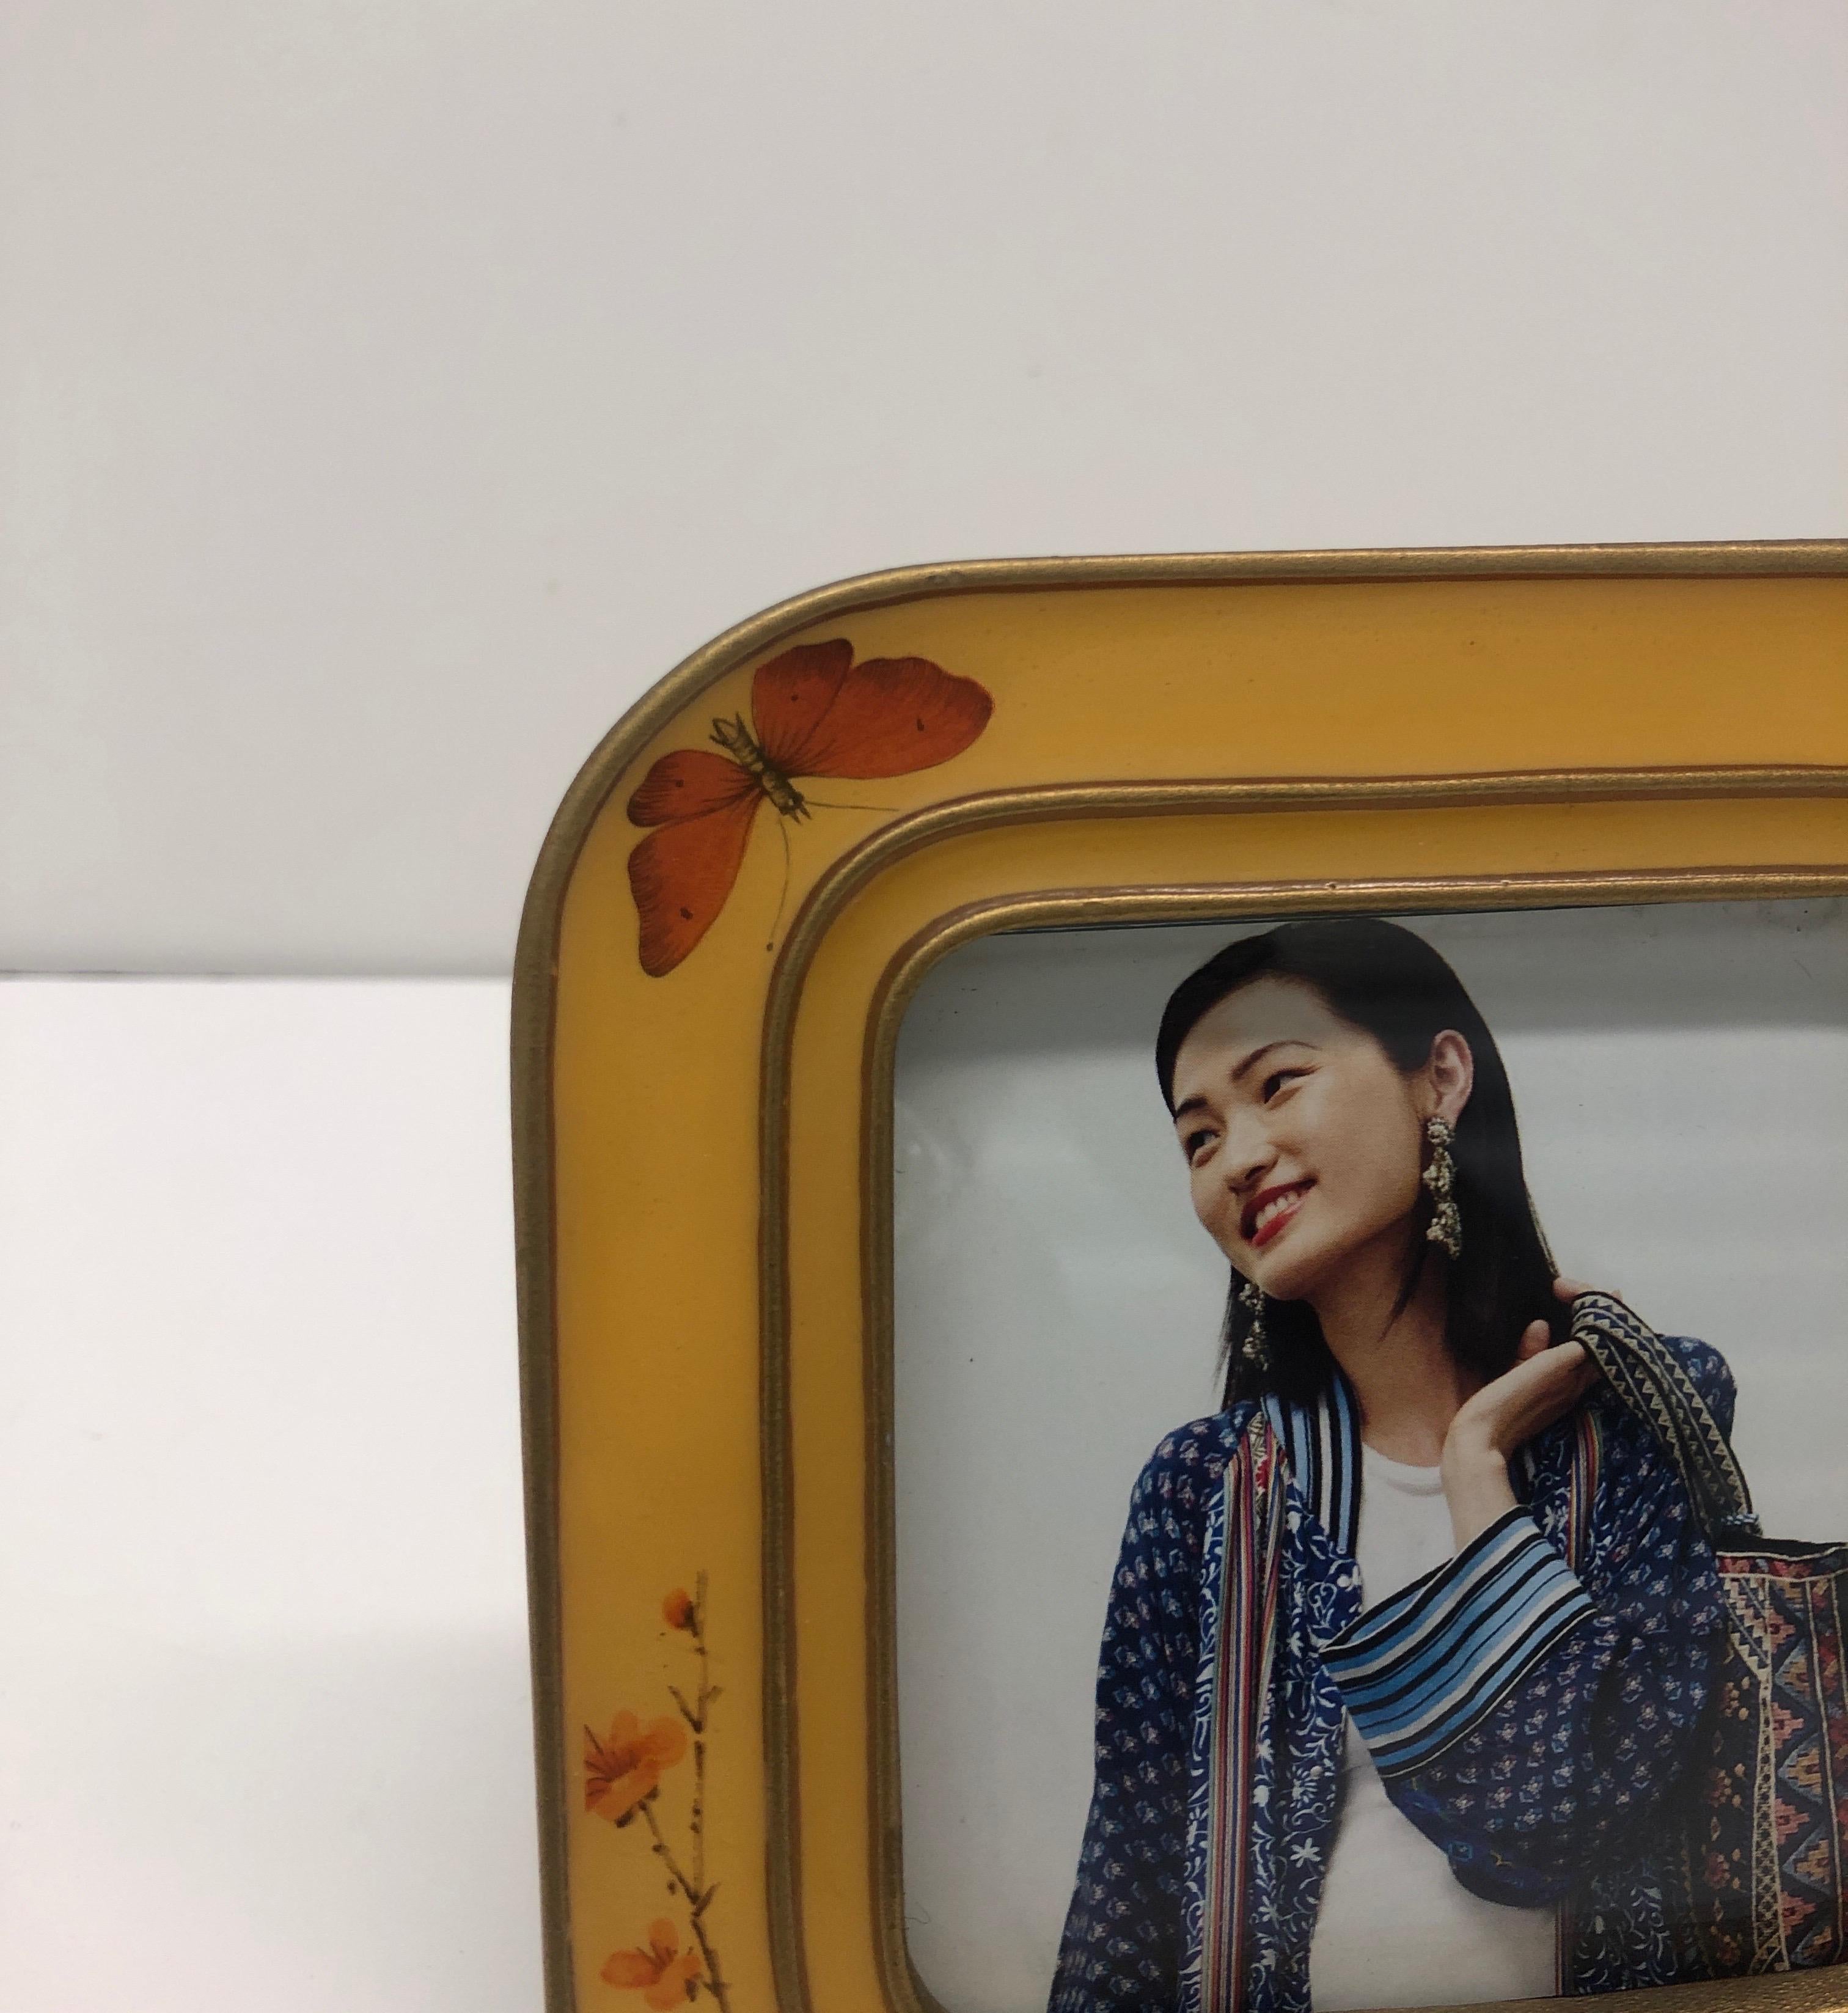 Yellow and orange enameled square decorative picture frame.
Butterflies and cherry blossom.
Wood back and stand.
Size: 5” H x 5” W x .25” D.